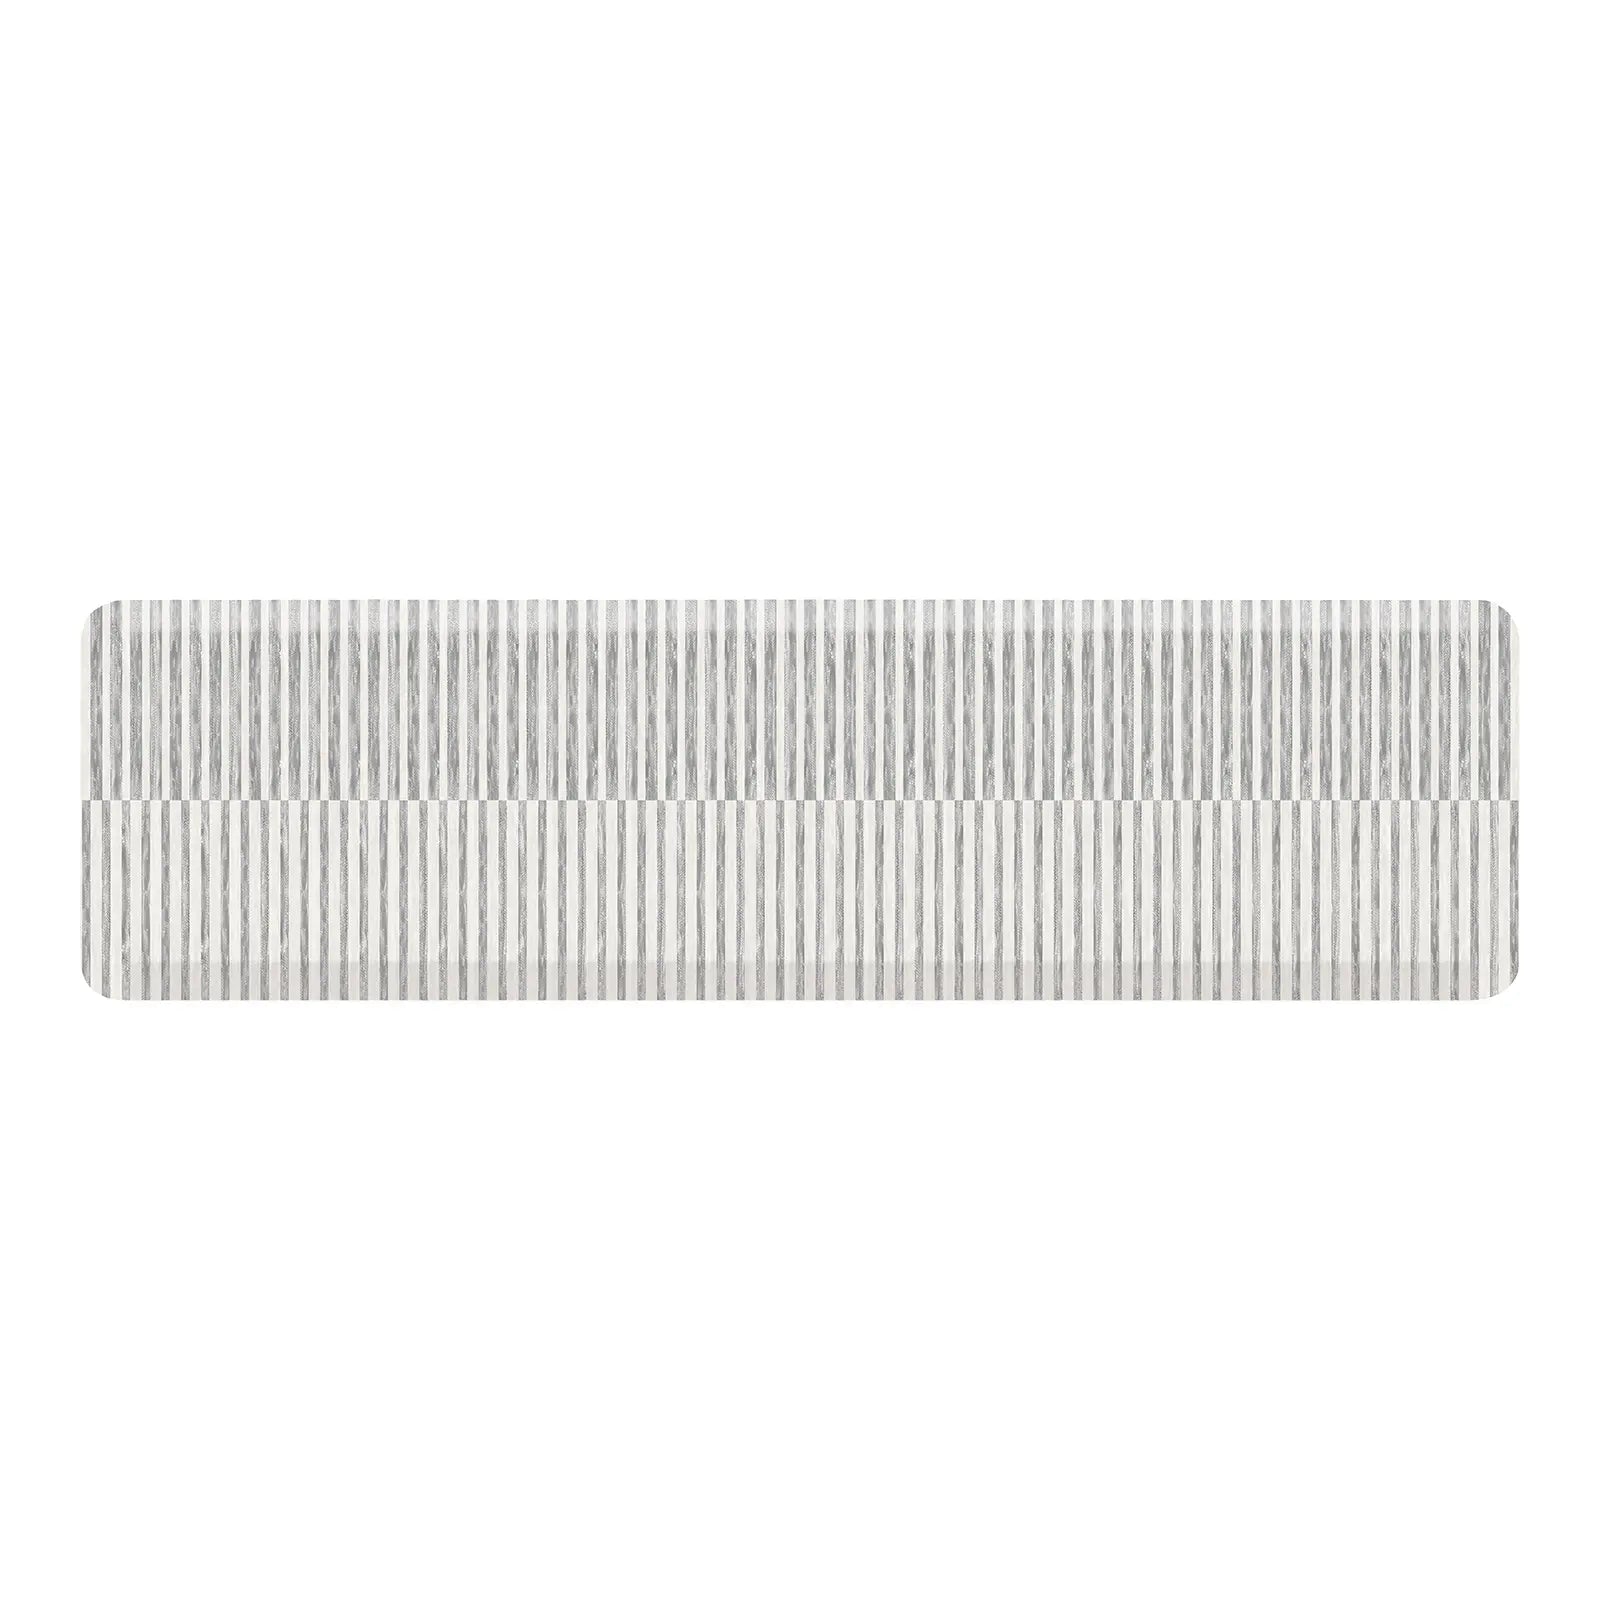 Reese pewter gray and white inverted stripe standing mat shown in size 20x72